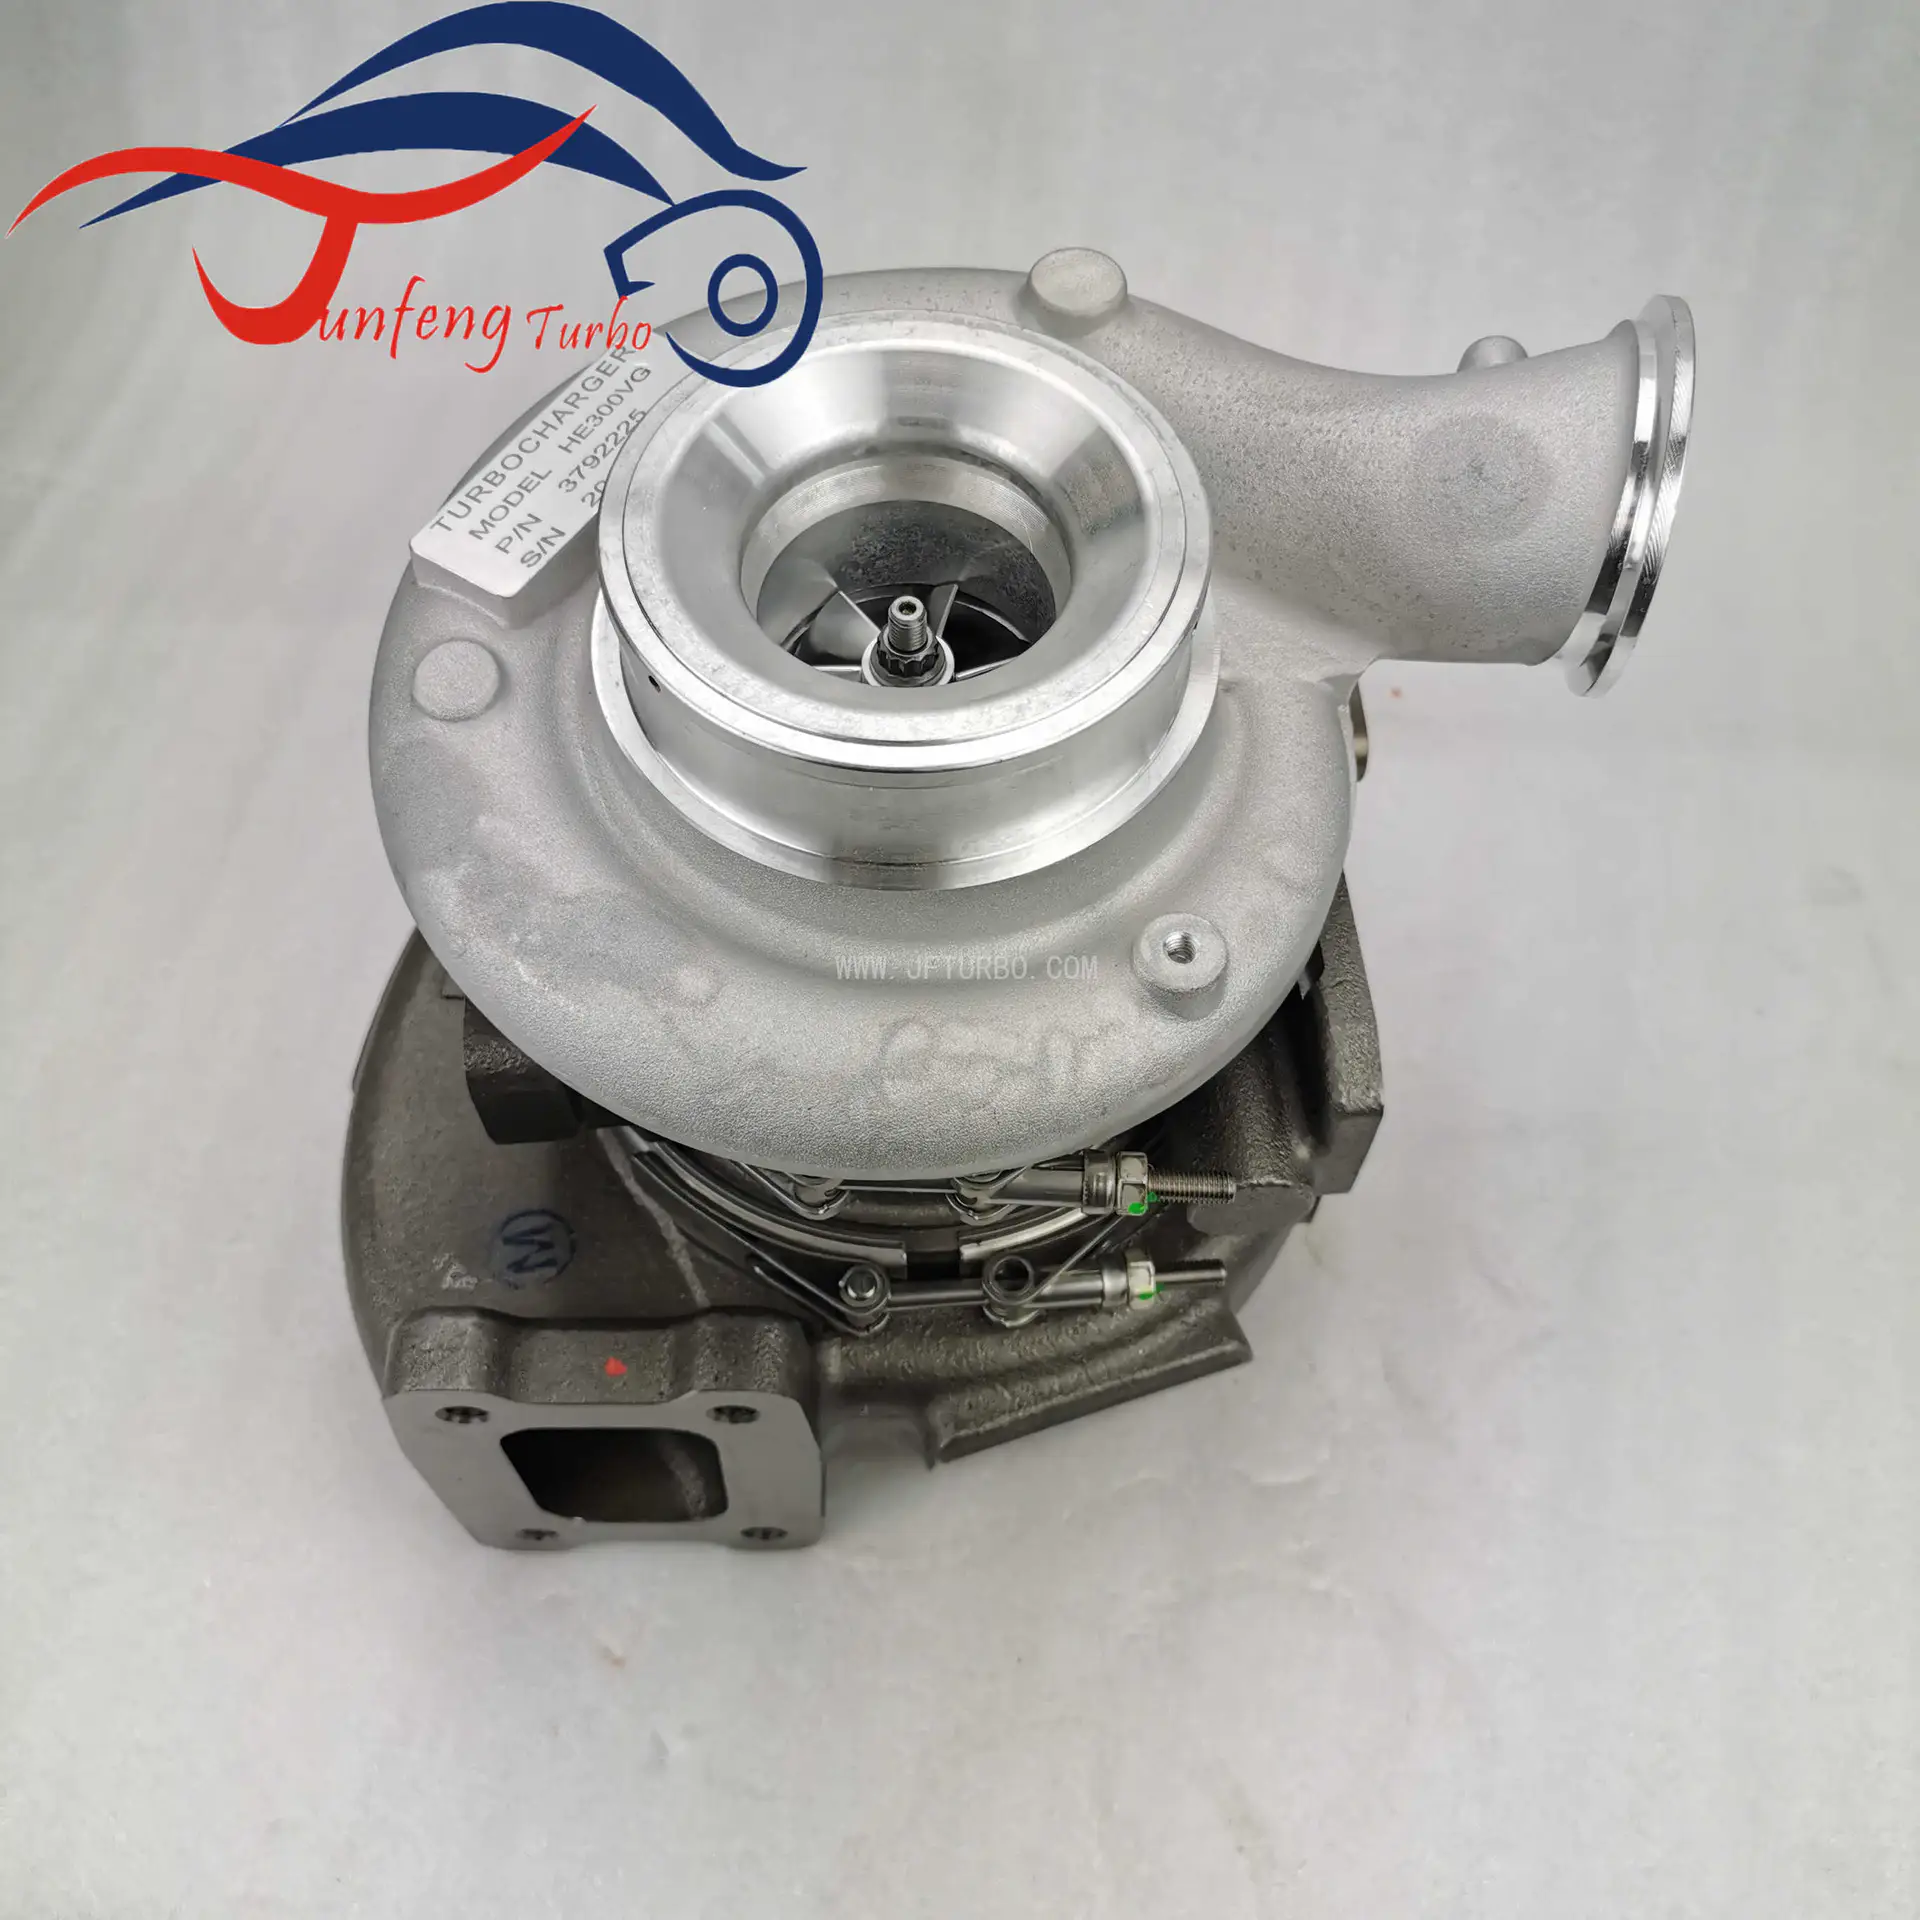 HE300VG turbocharger Cummins Bus Truck 6.7 ISBE Engines 3792225 3792227 4309470 turbo No actuator